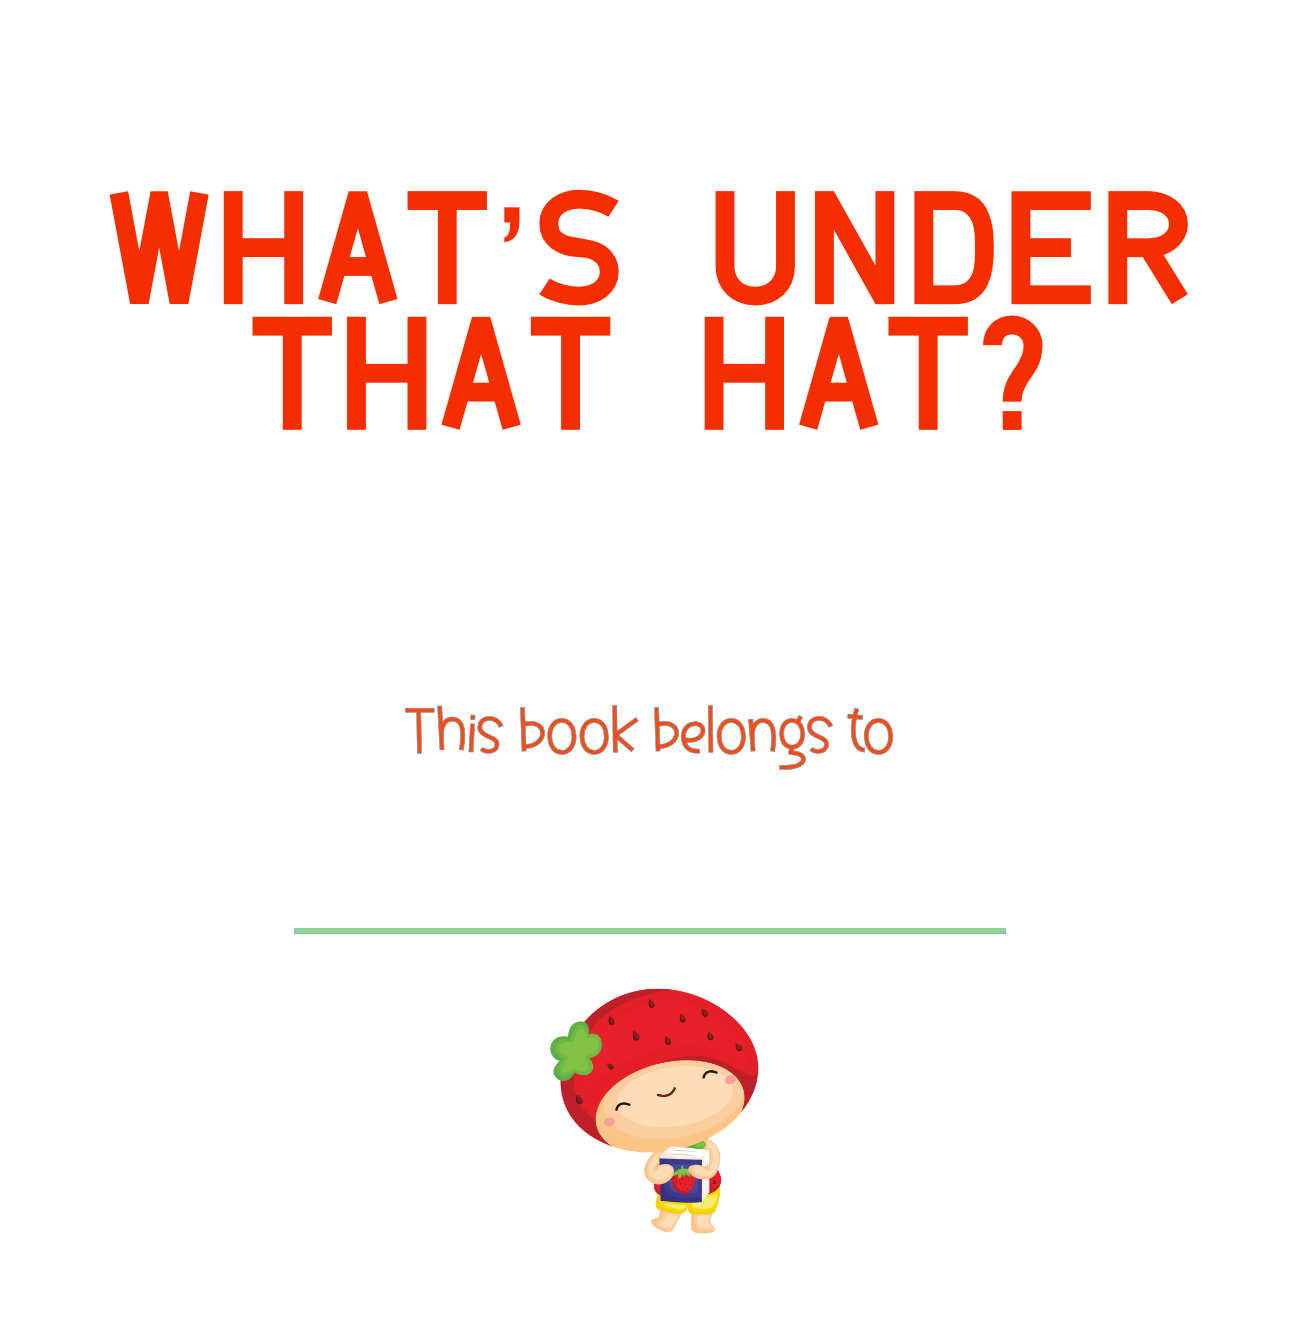 Bedtime Stories What's Under That Hat short stories for kids page 2